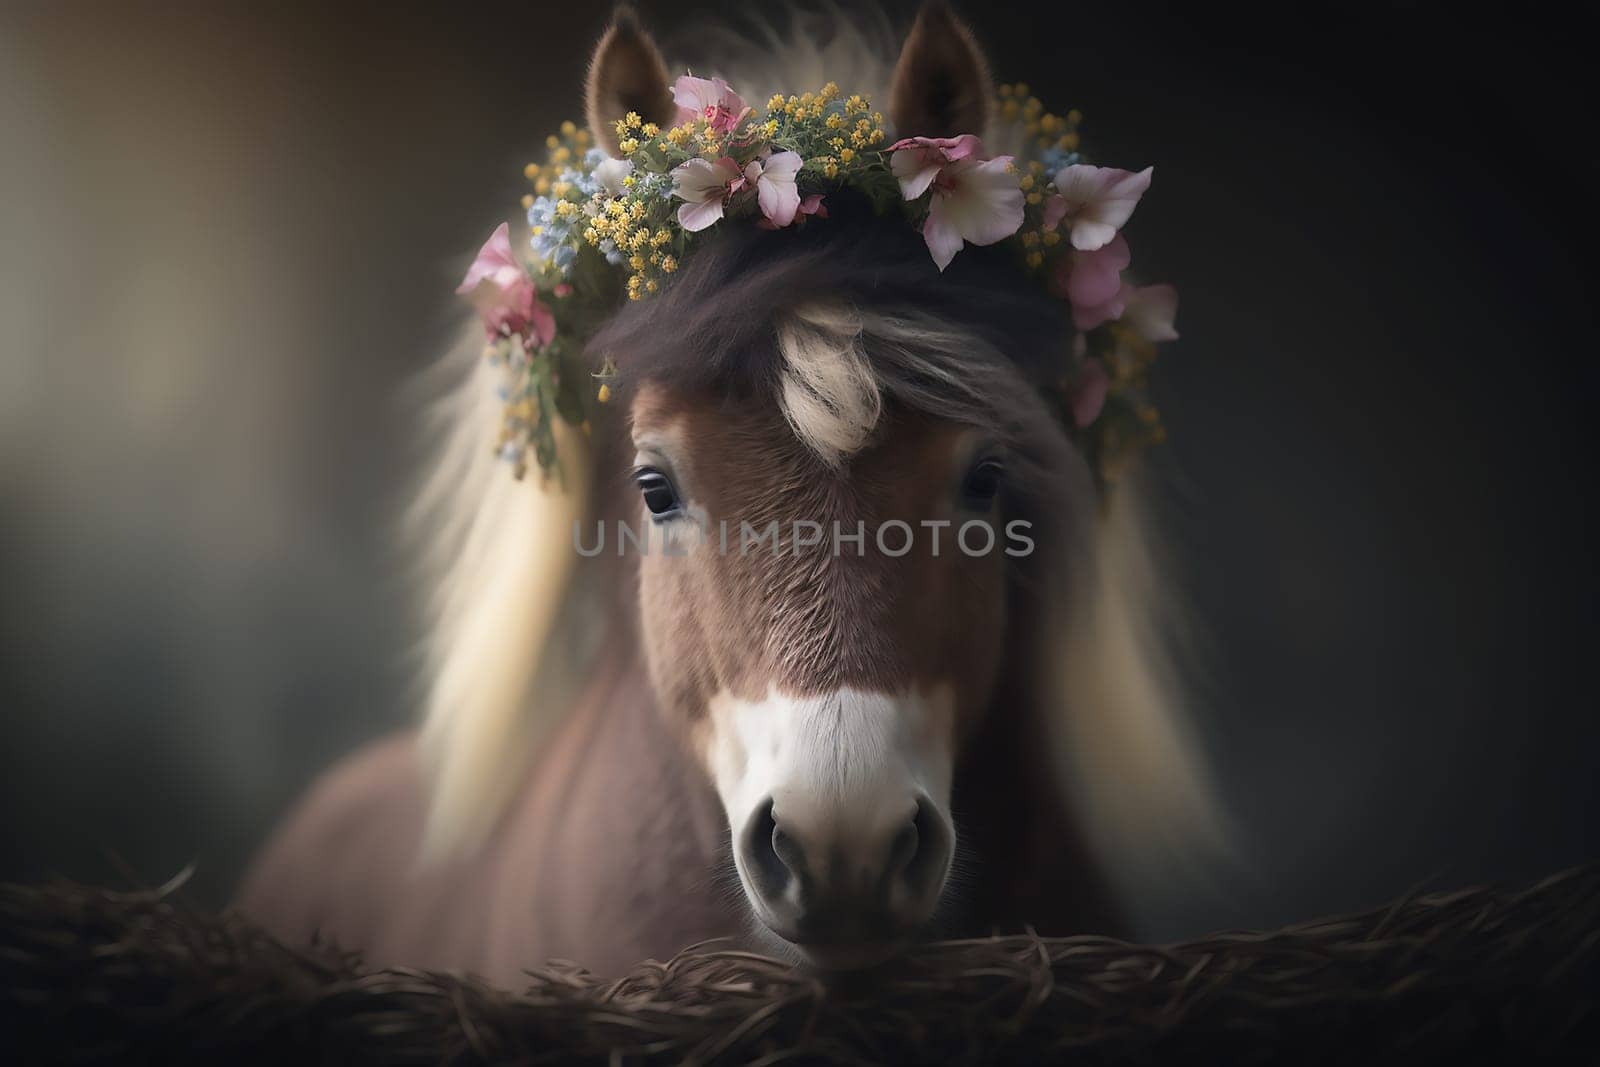 Cute brown horse in a floral wreath on his head, on a dark background by Zakharova